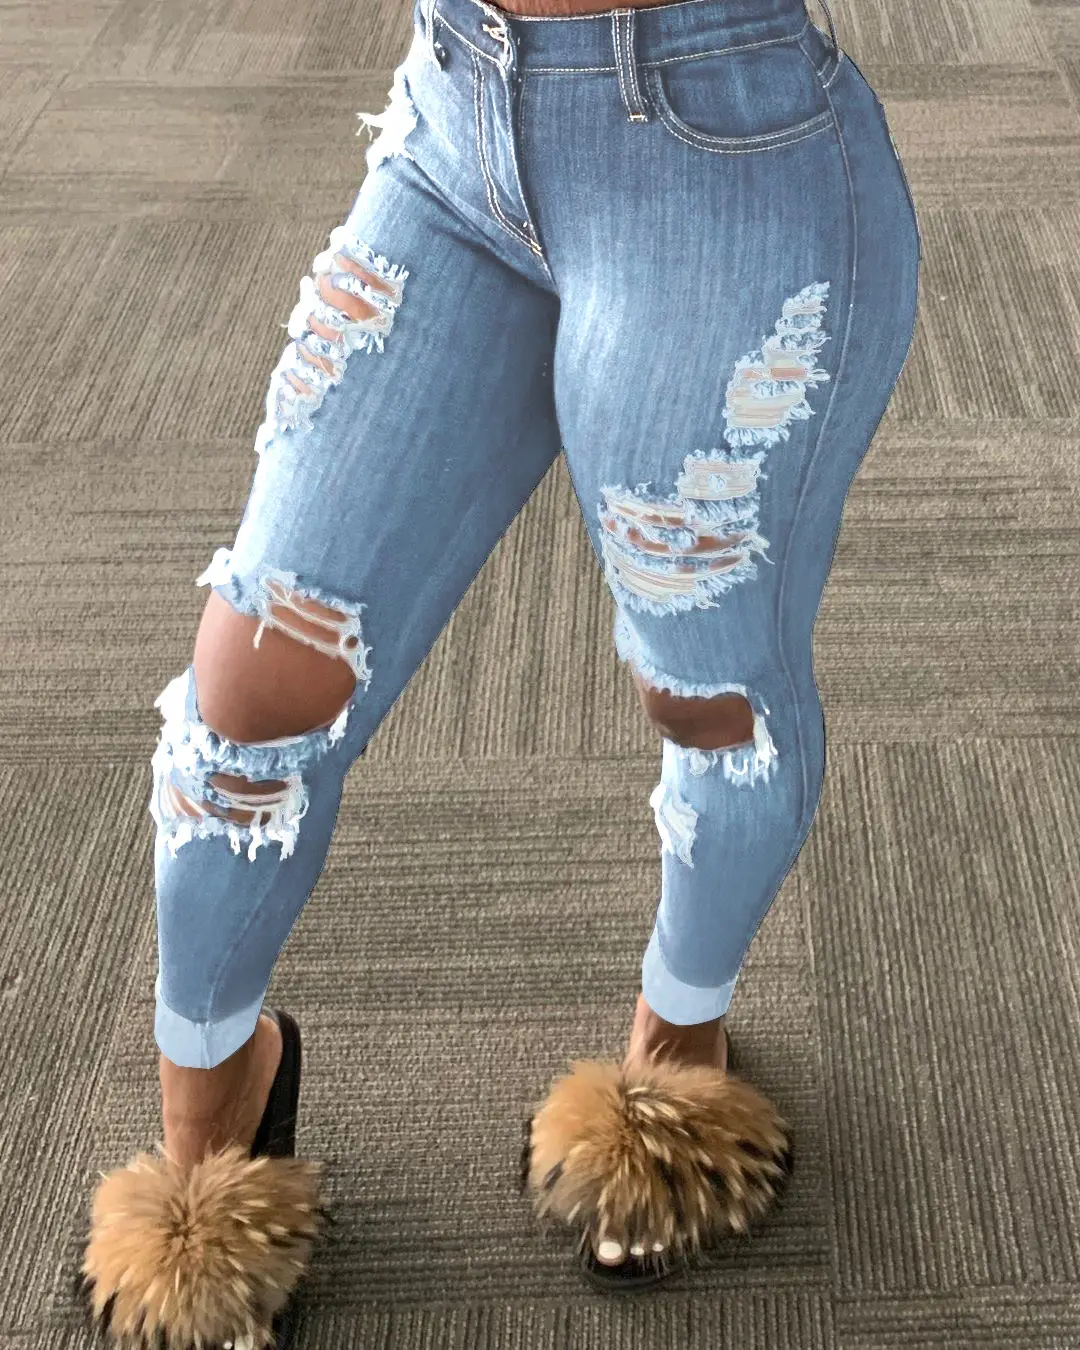 2022 new Wholesale Casual Women Jeans Denim Pant Ladies Skinny High Waist Jeans With Best Quality clothing